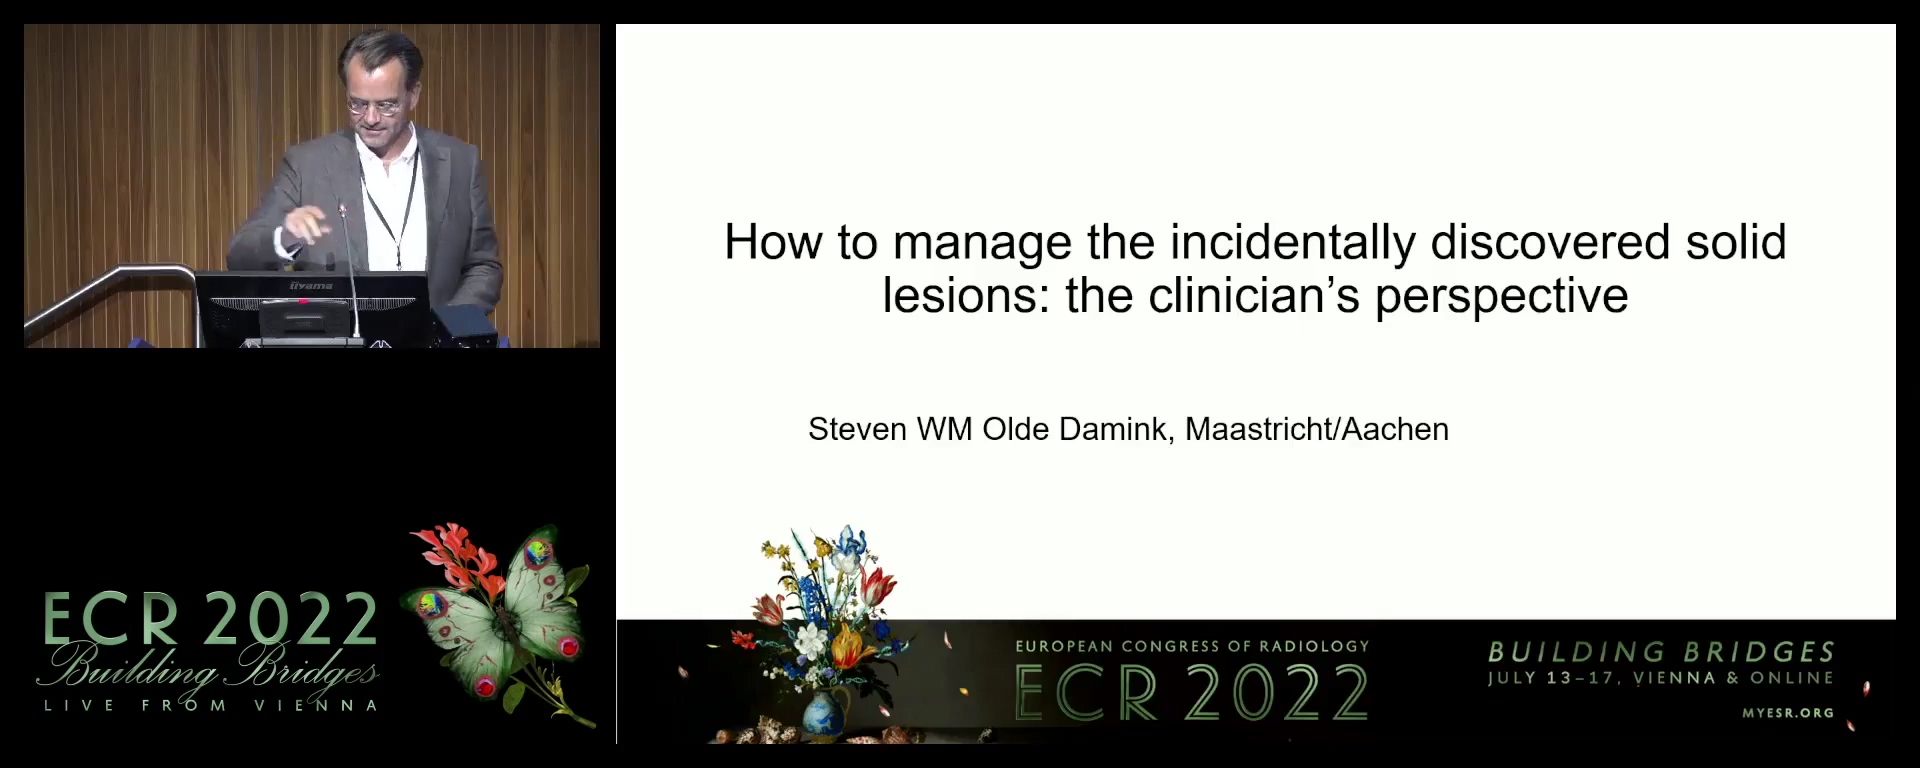 How to manage the incidentally discovered solid lesion: the clinician's perspective - Steven Olde Damink, Maastricht / NL